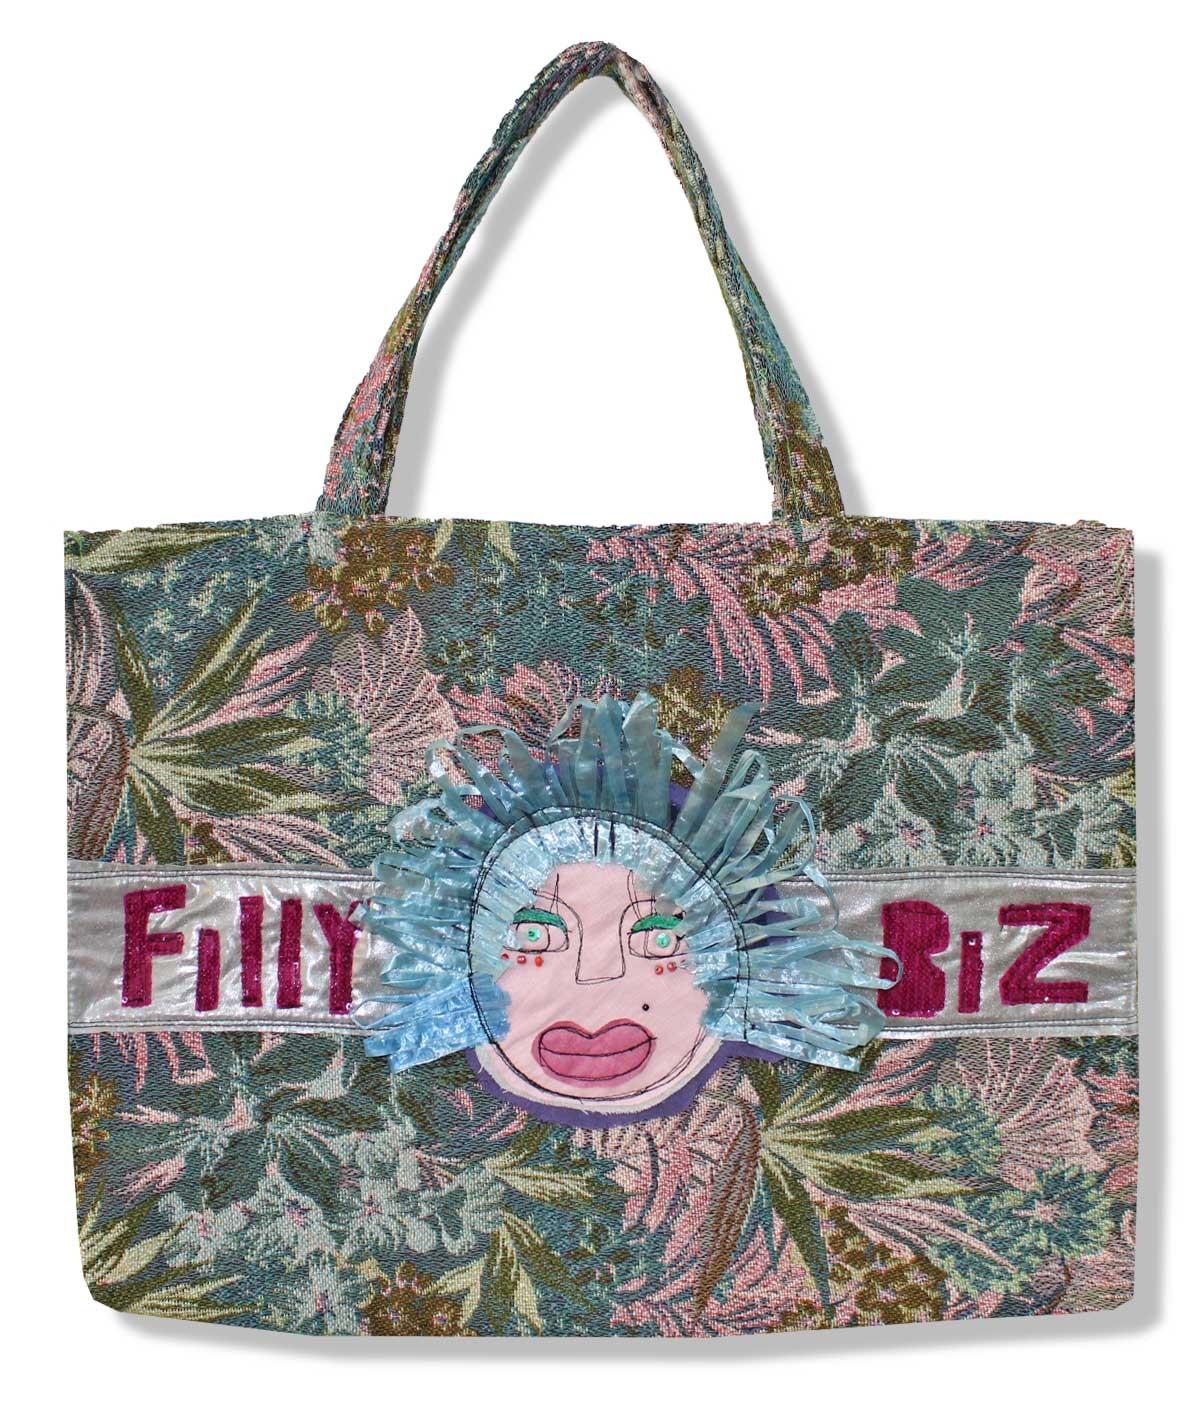 Fabric tote bag with the...